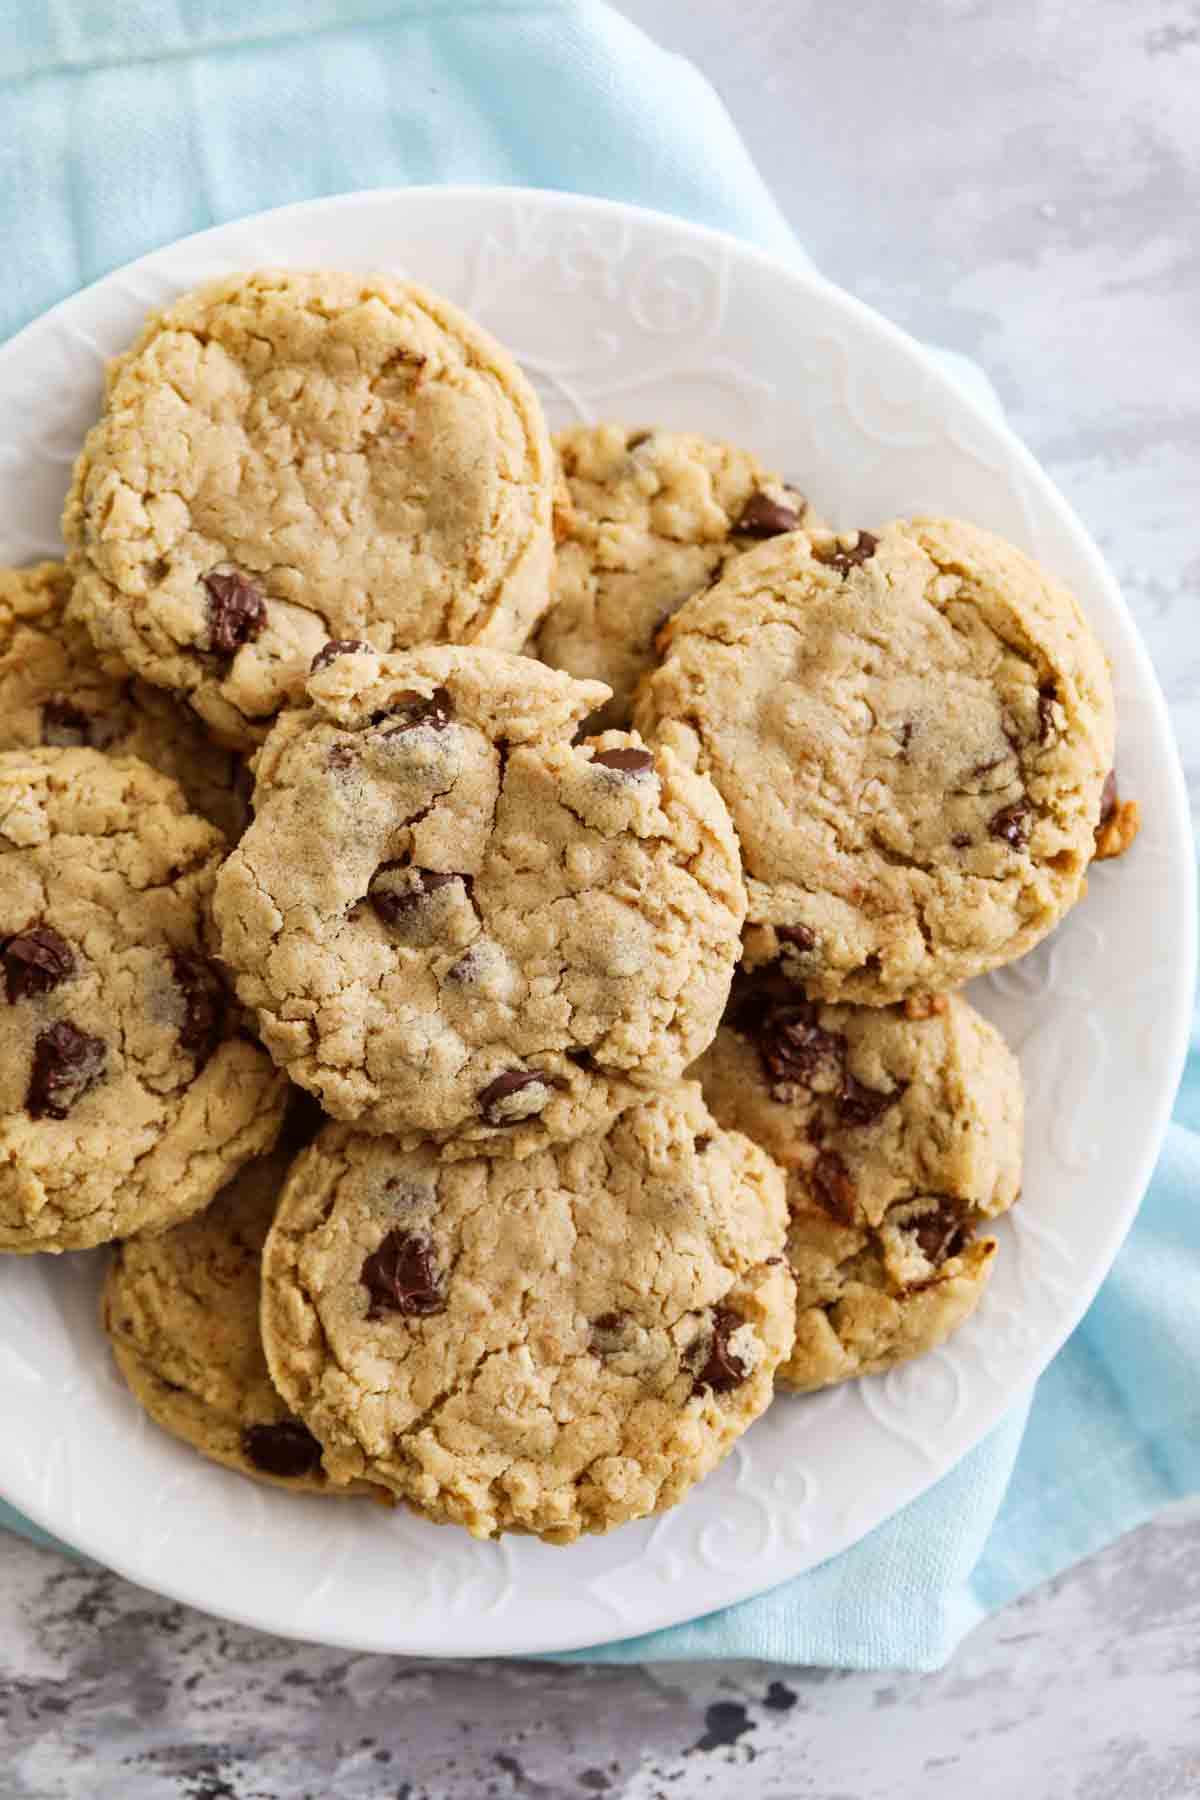 cookies made with peanut butter, oatmeal, and chocolate chips on a plate with a blue towel